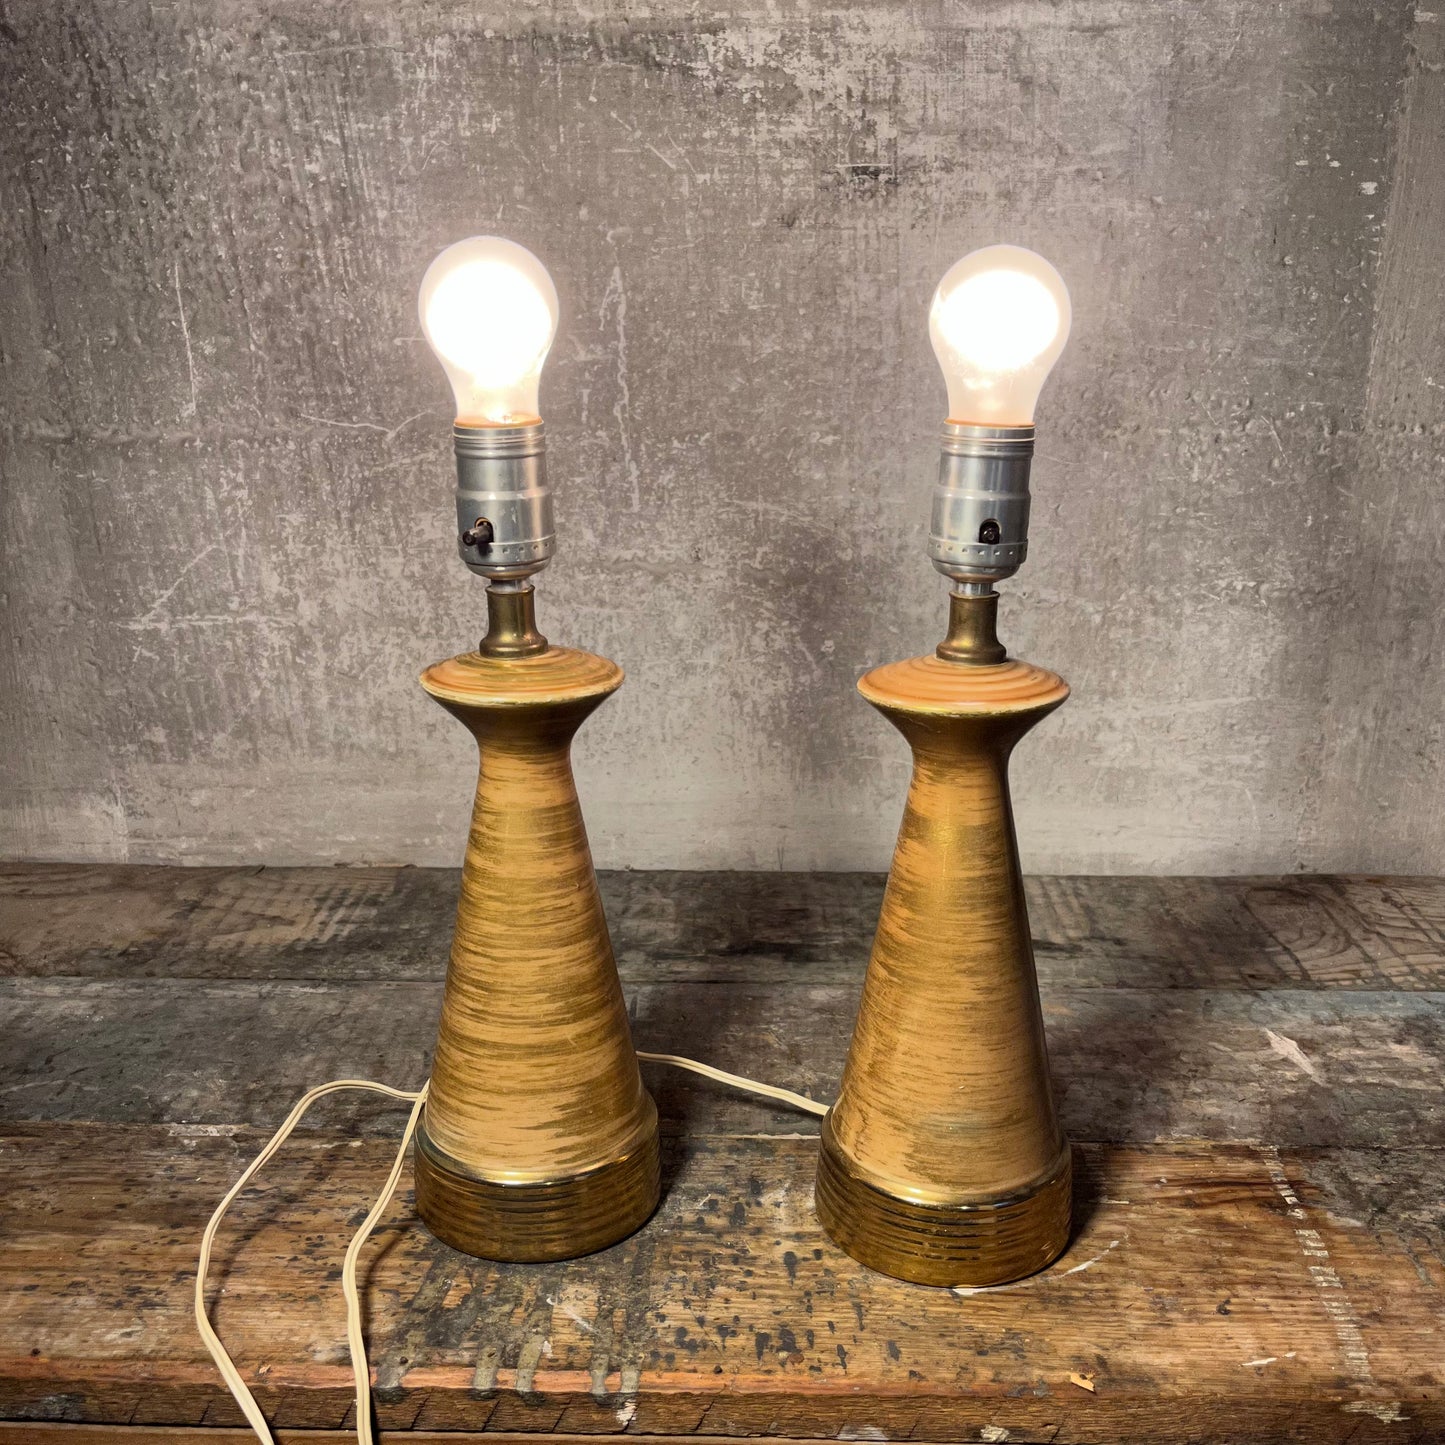 Pair of Unique Gold and Tan Lamps